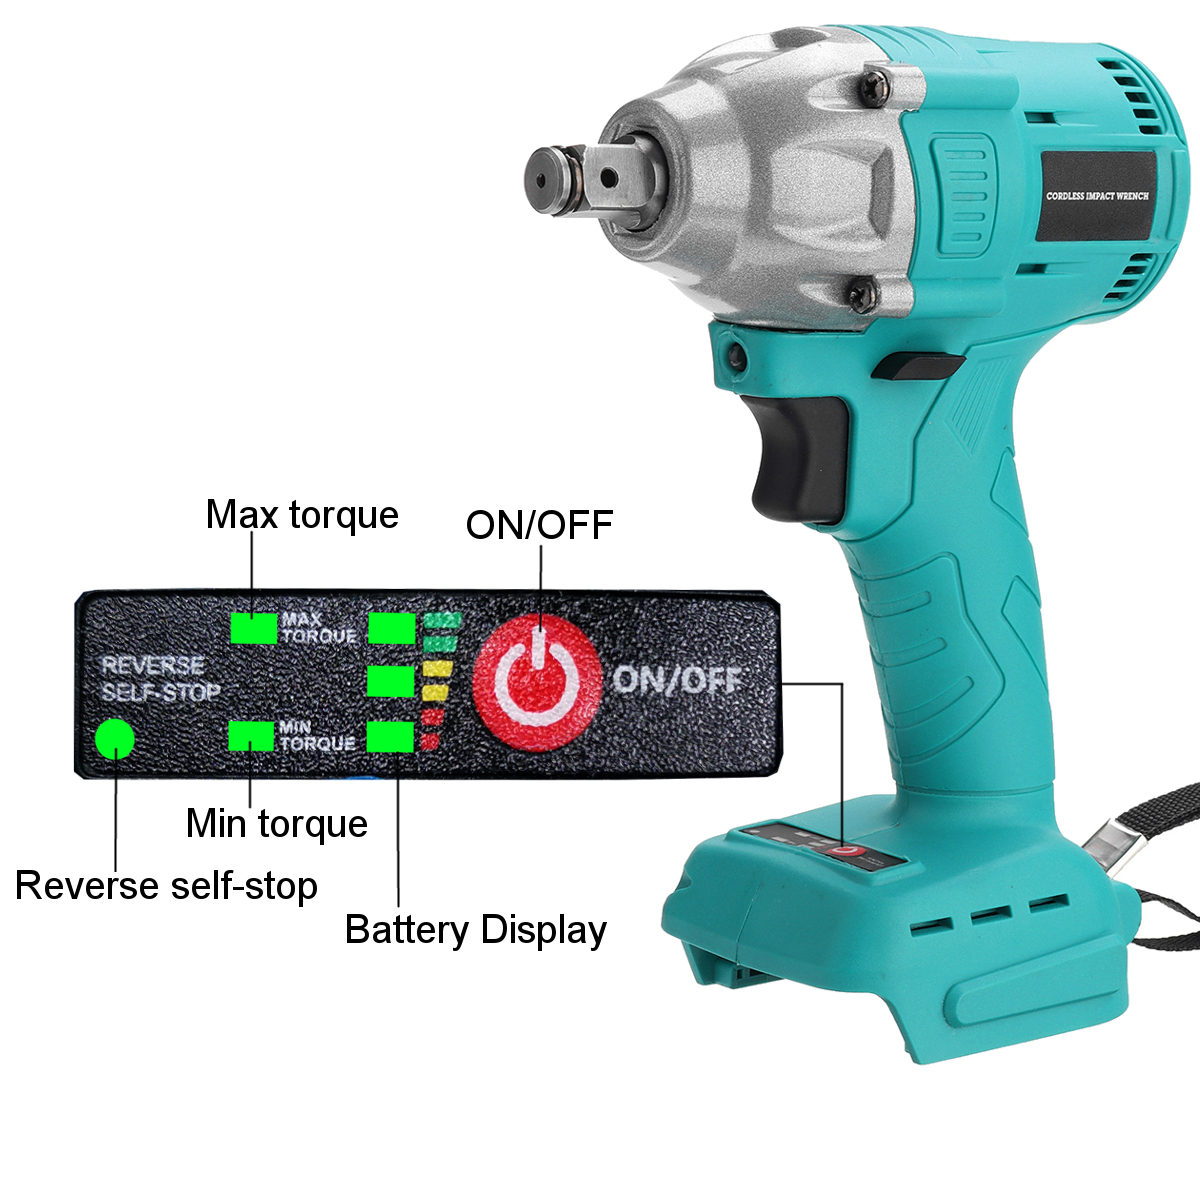 520NM-Cordless-Electric-Wrench-M10-M20-Power-Wrench-Adapted-For-18V-Makita-Battery-1834528-8